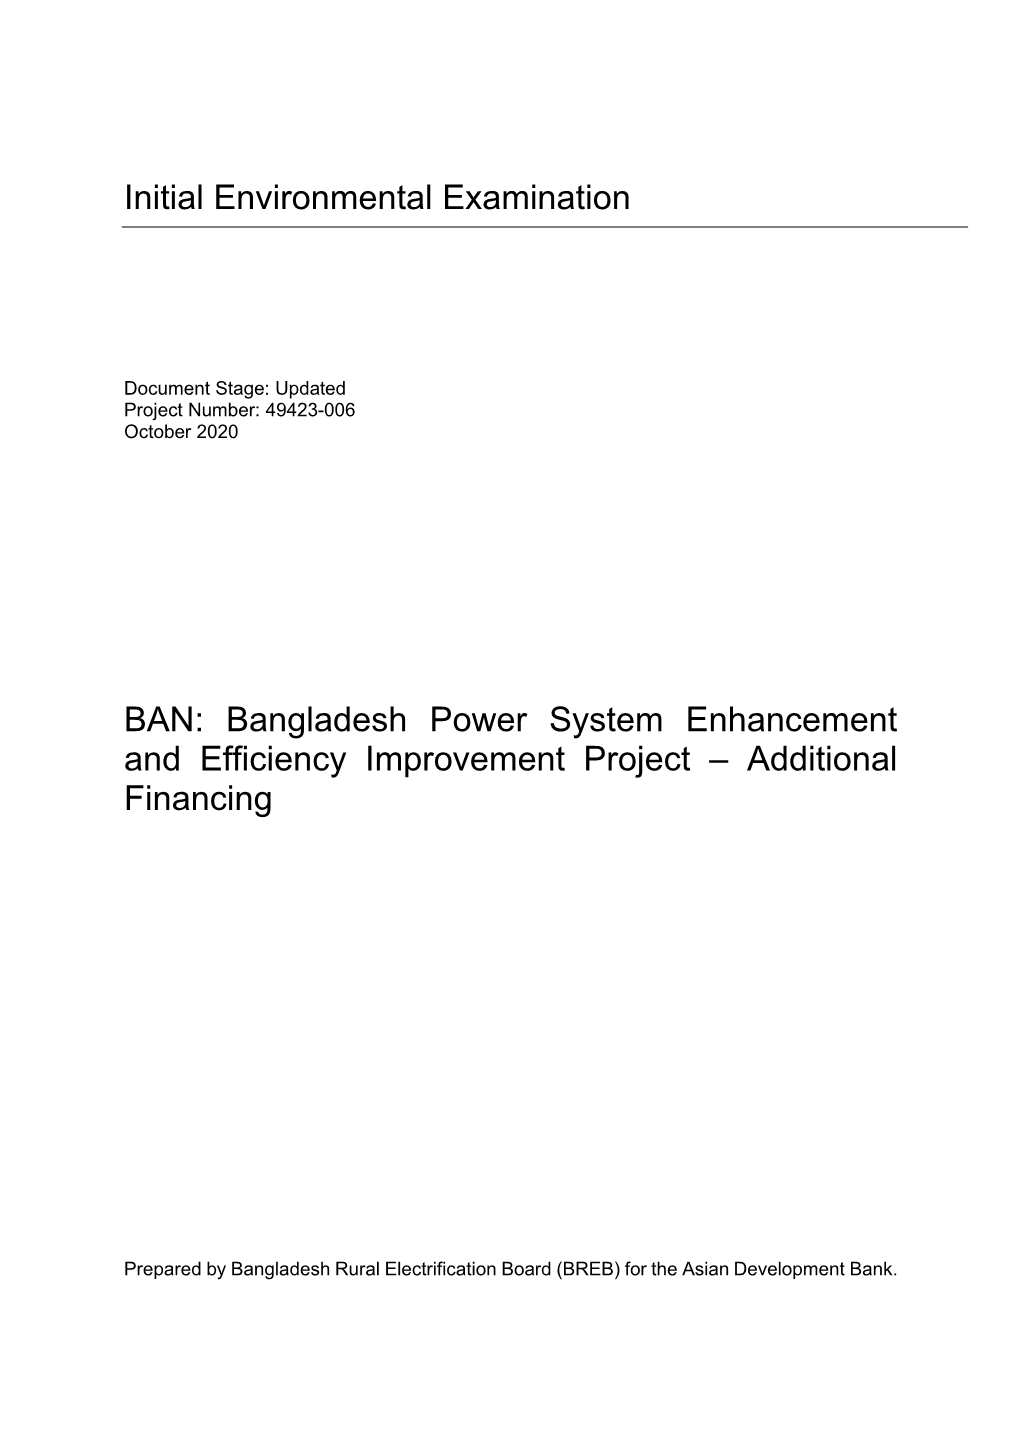 49423-006: Bangladesh Power System Enhancement and Efficiency Improvement Project